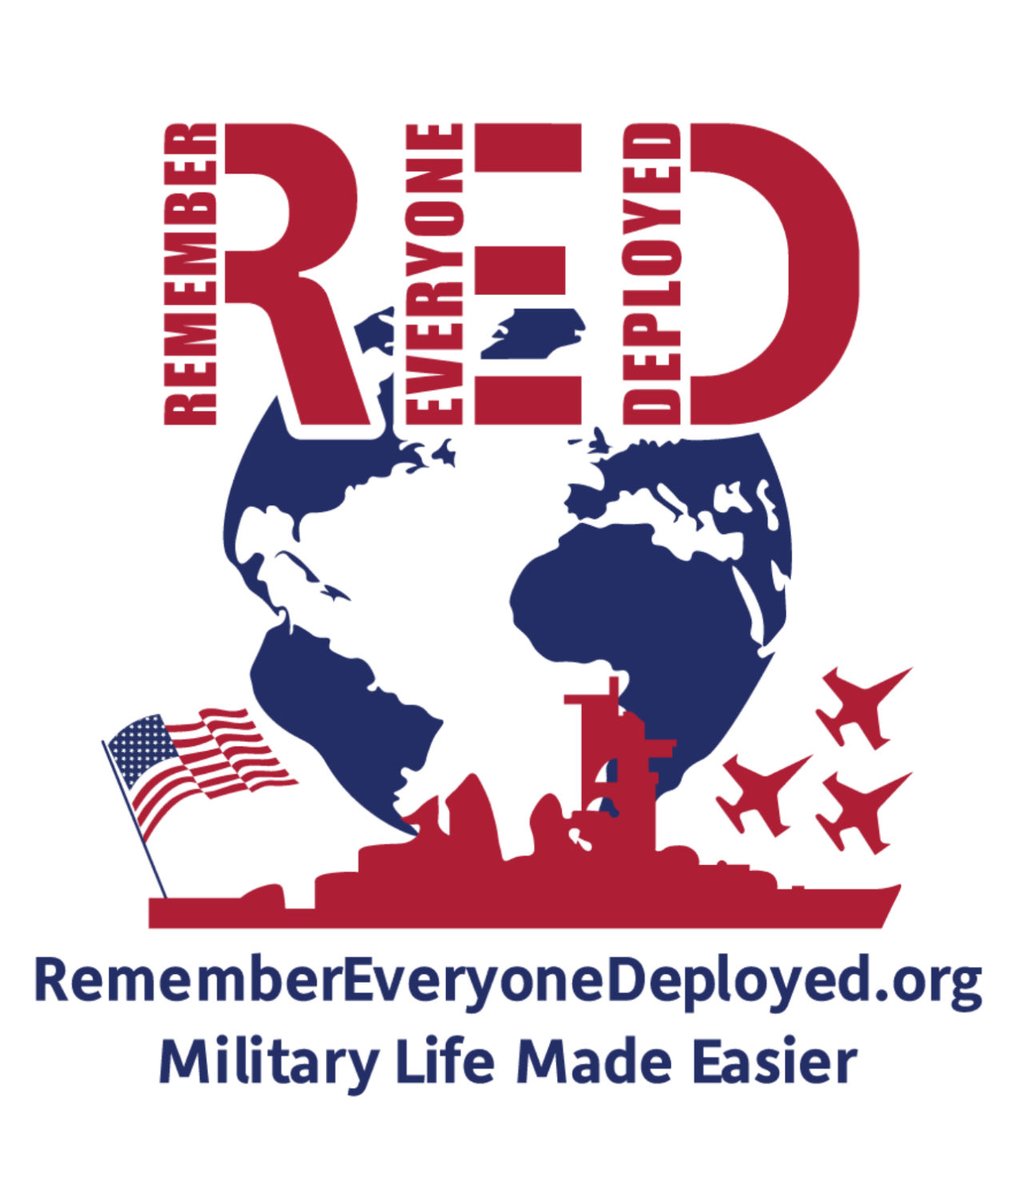 As you go about your daily business today & reach out in service to all of our students, staff, & community. Remember everyone deployed this Memorial Day weekend! ⁦@muhlsd⁩ ⁦@PSEA⁩ ⁦@PSBA⁩ ⁦@PADeptofEd⁩ ⁦⁦@DeptofDefense⁩ ⁦@PANationalGuard⁩